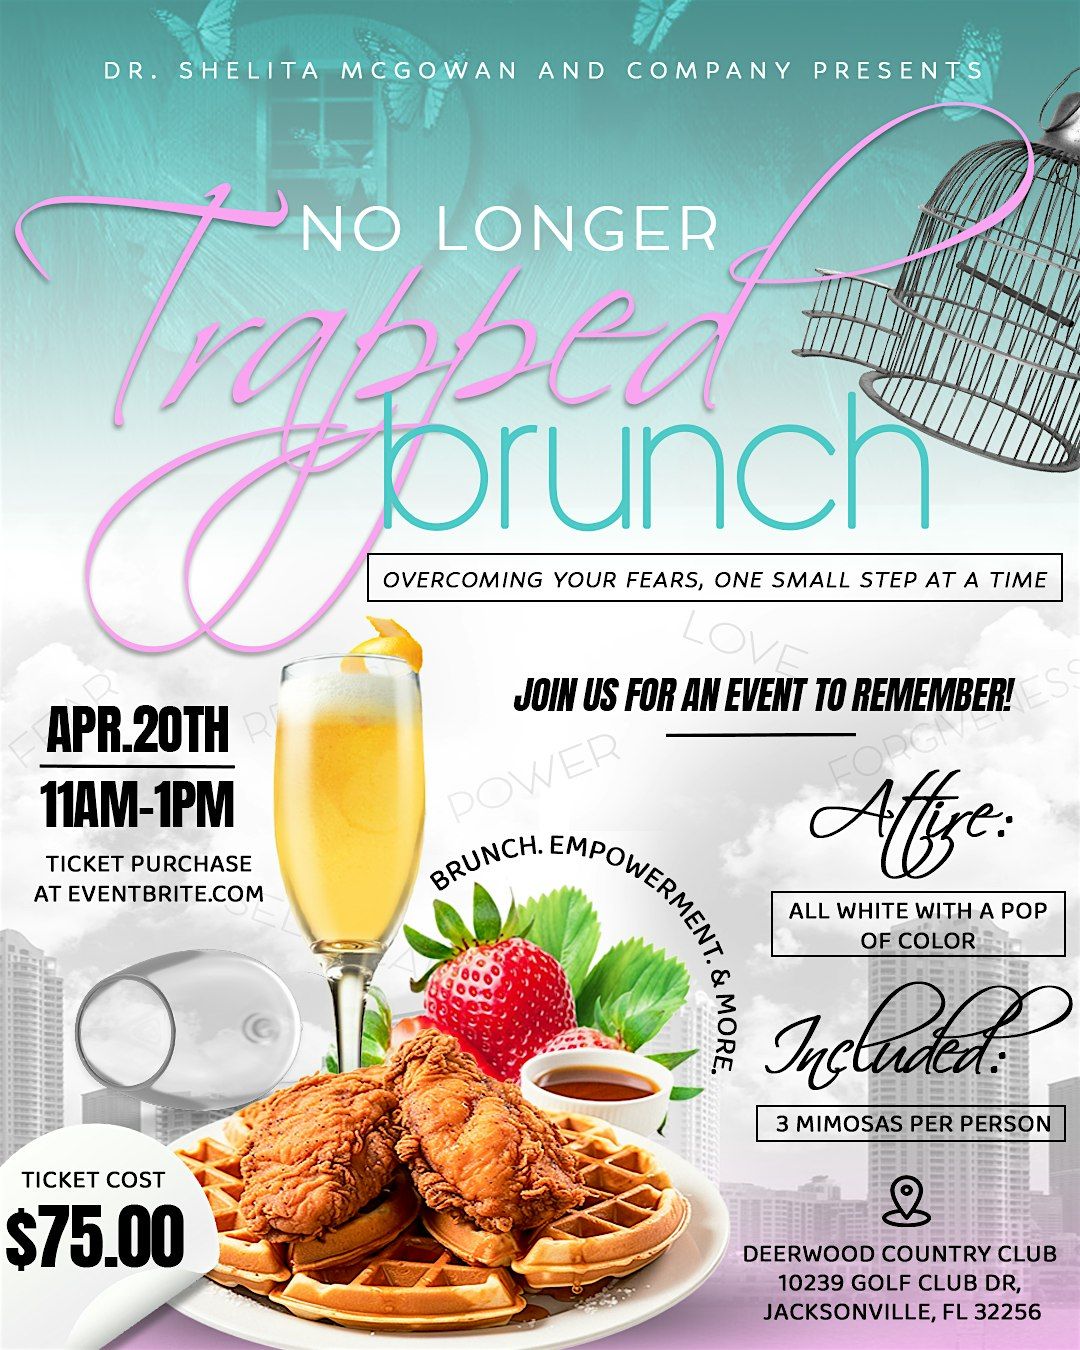 No Longer Trapped Brunch; Overcoming your fears, one small step at a time.